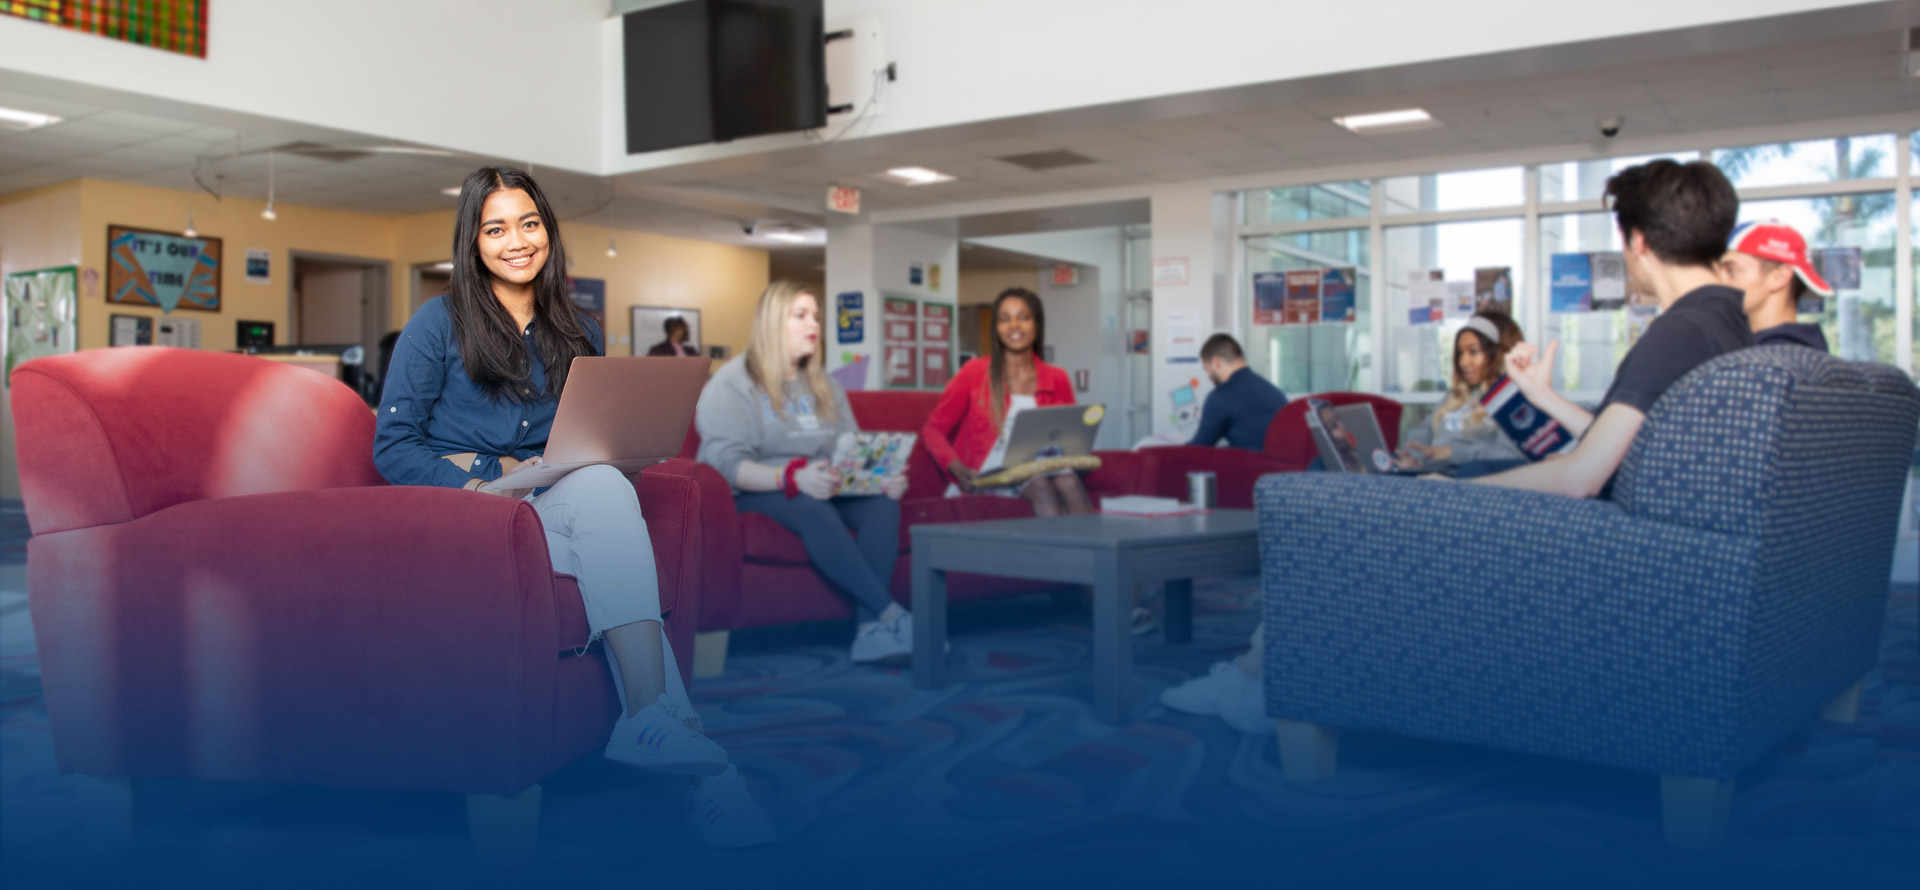 FAU Apply for oncampus housing